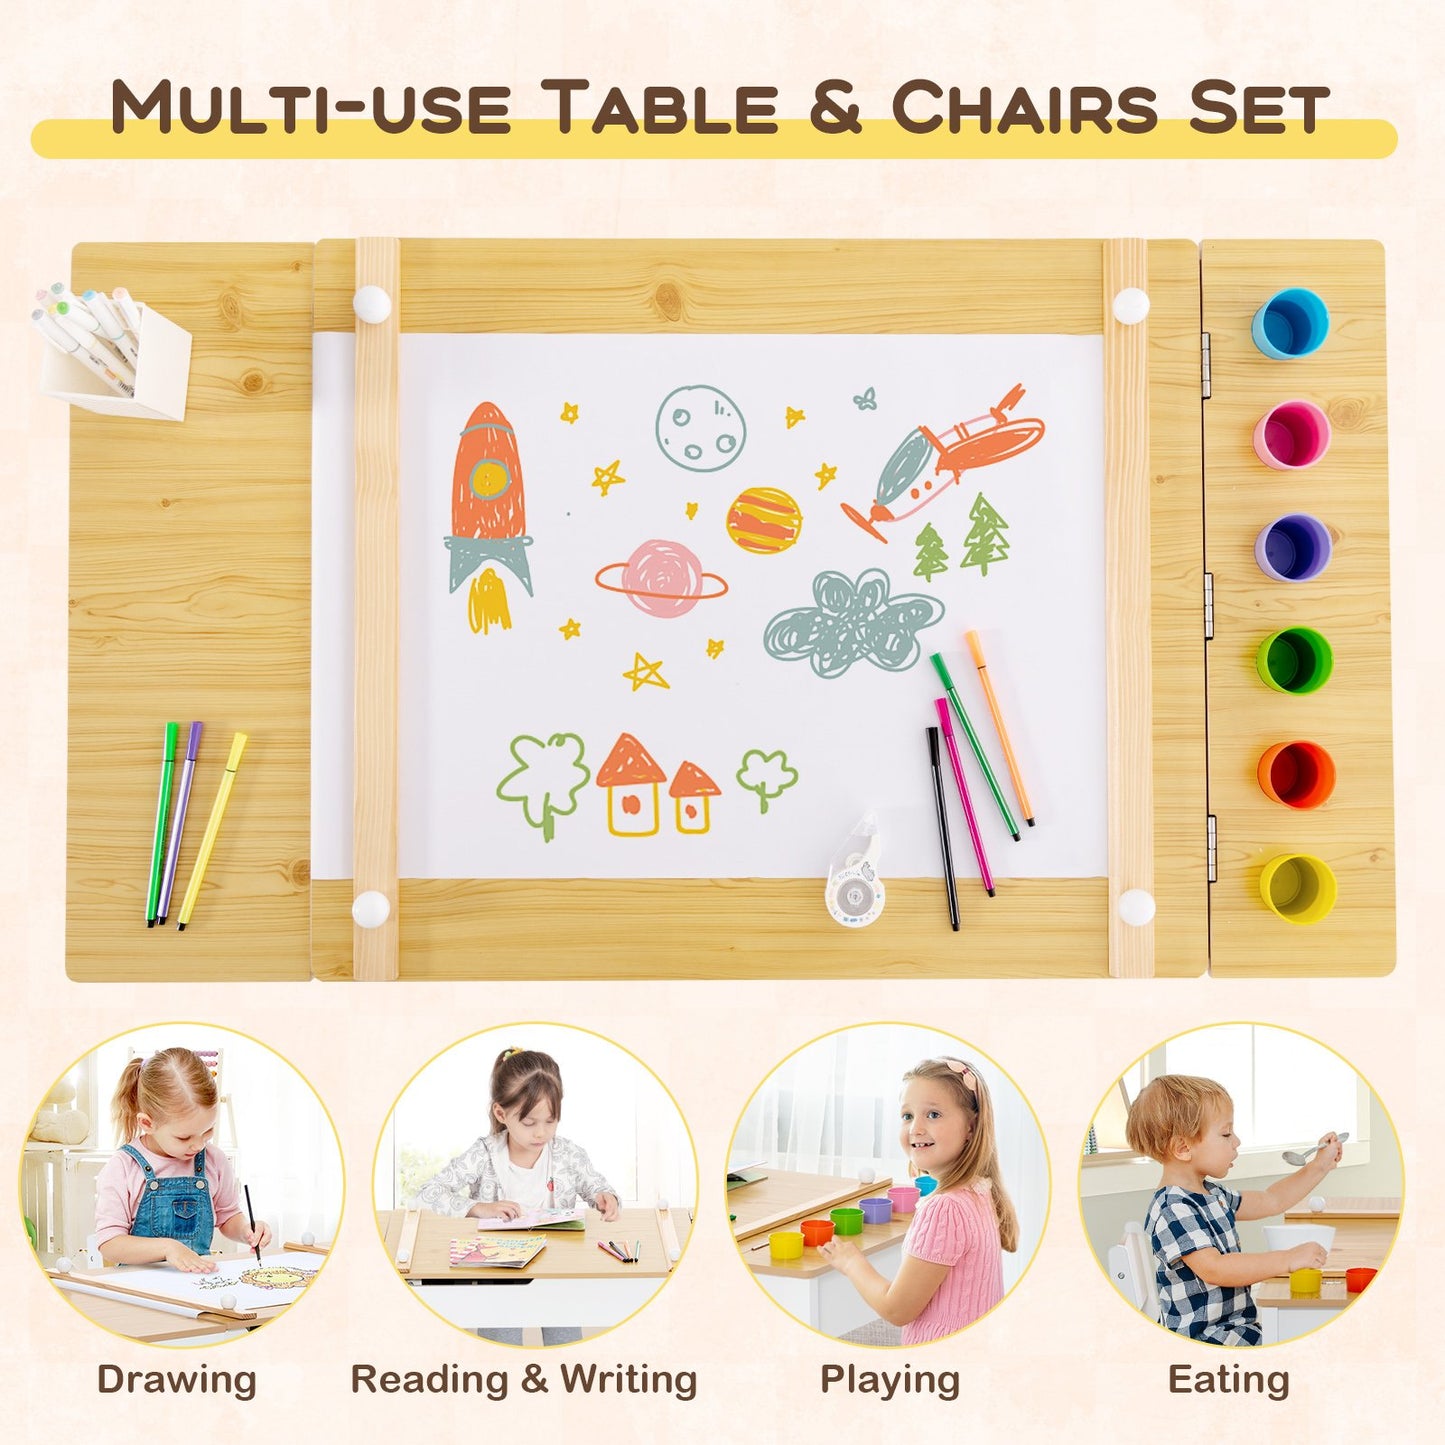 Children Art Activity Table and Drawing Table, Natural